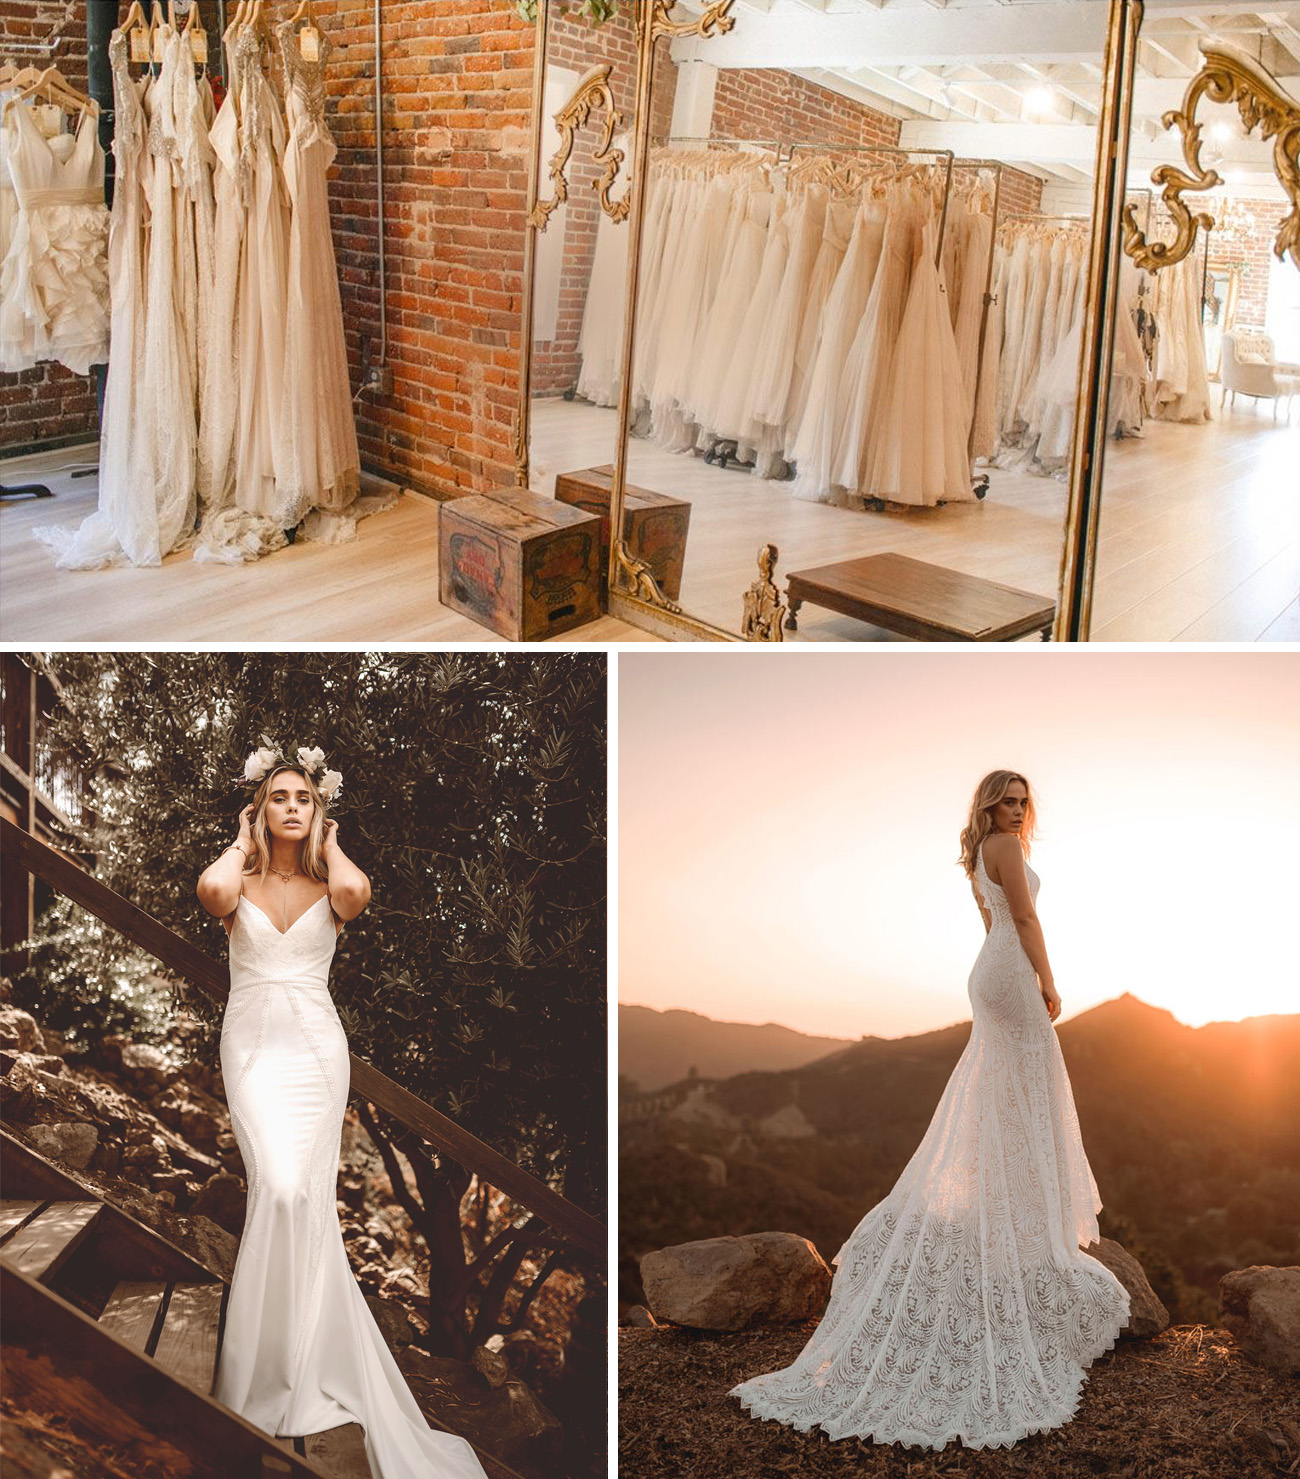 Where to Shop for a Wedding Dress in Southern California